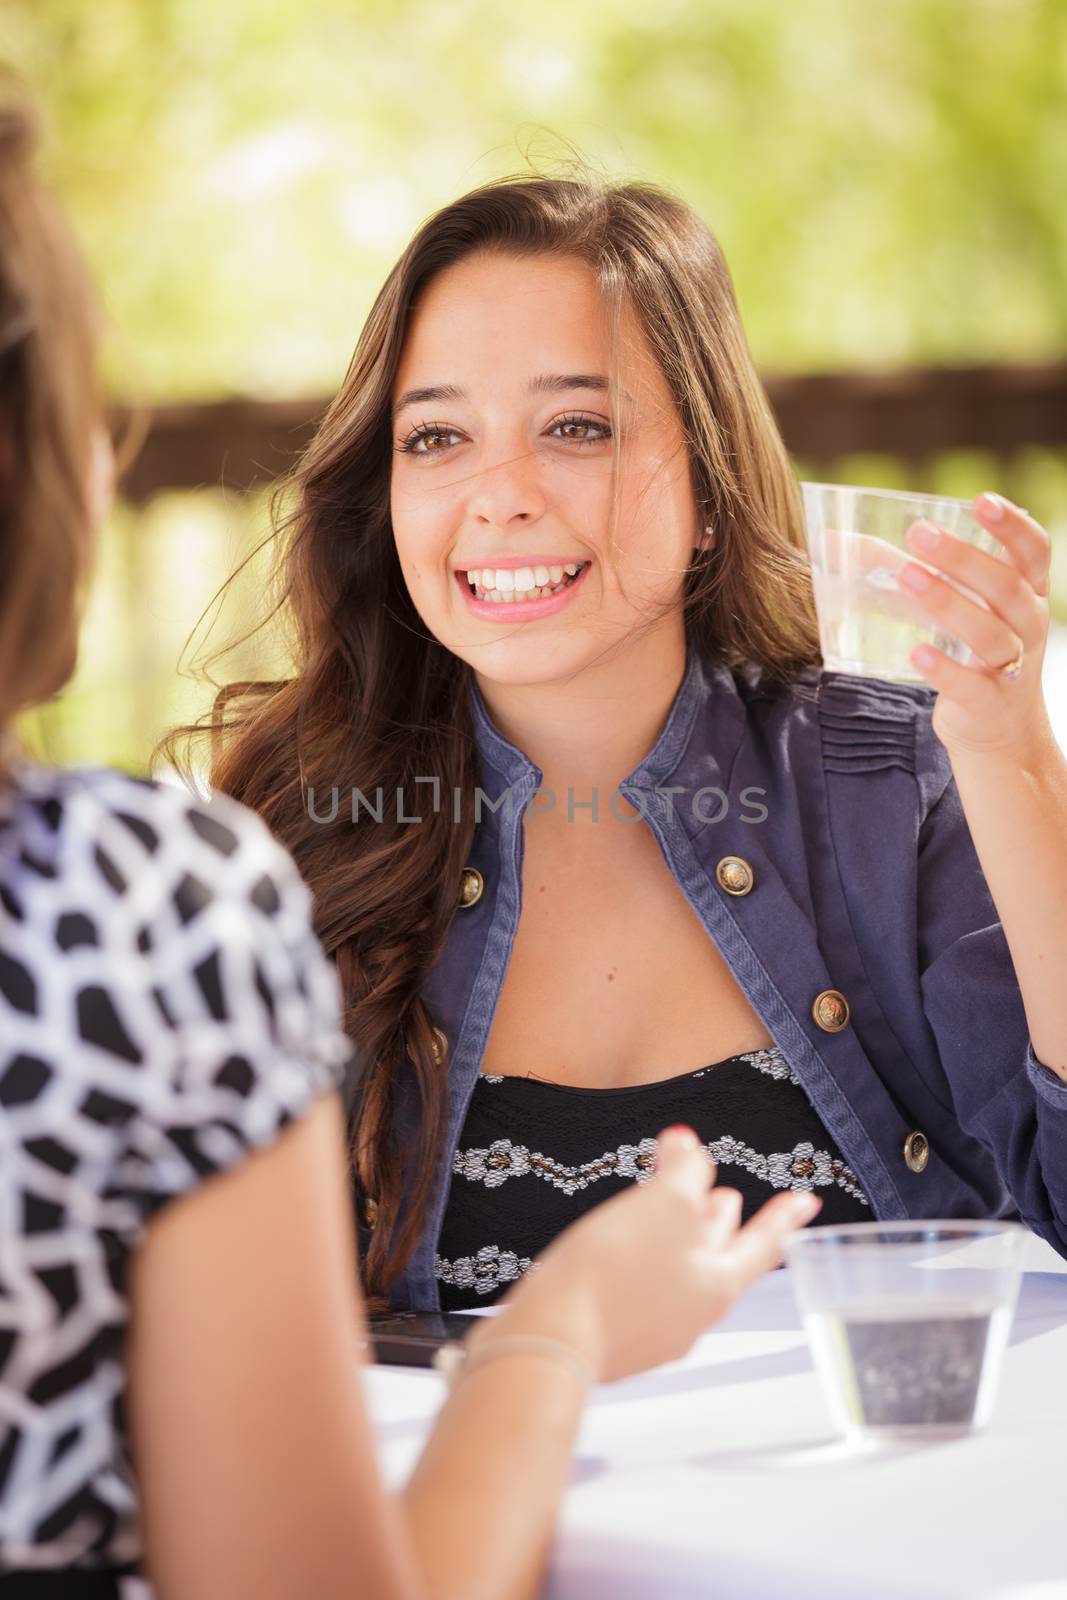 Expressive Young Adult Woman Having Drinks and Talking with Her Friend Outdoors by Feverpitched